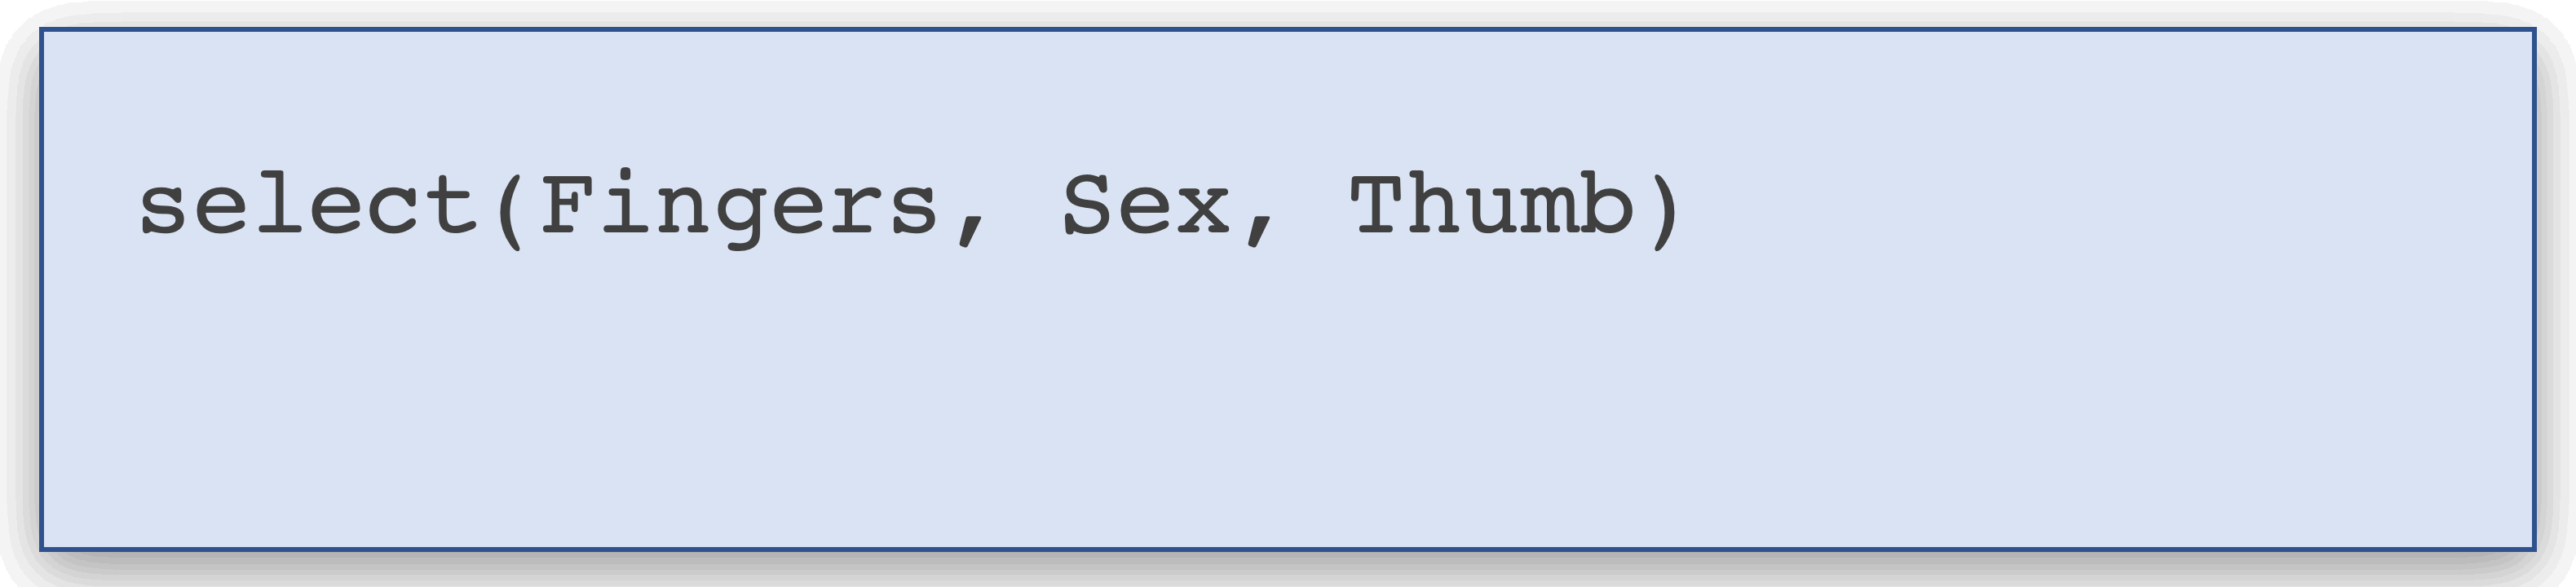 select(Fingers, Sex, Thumb) going inside head()